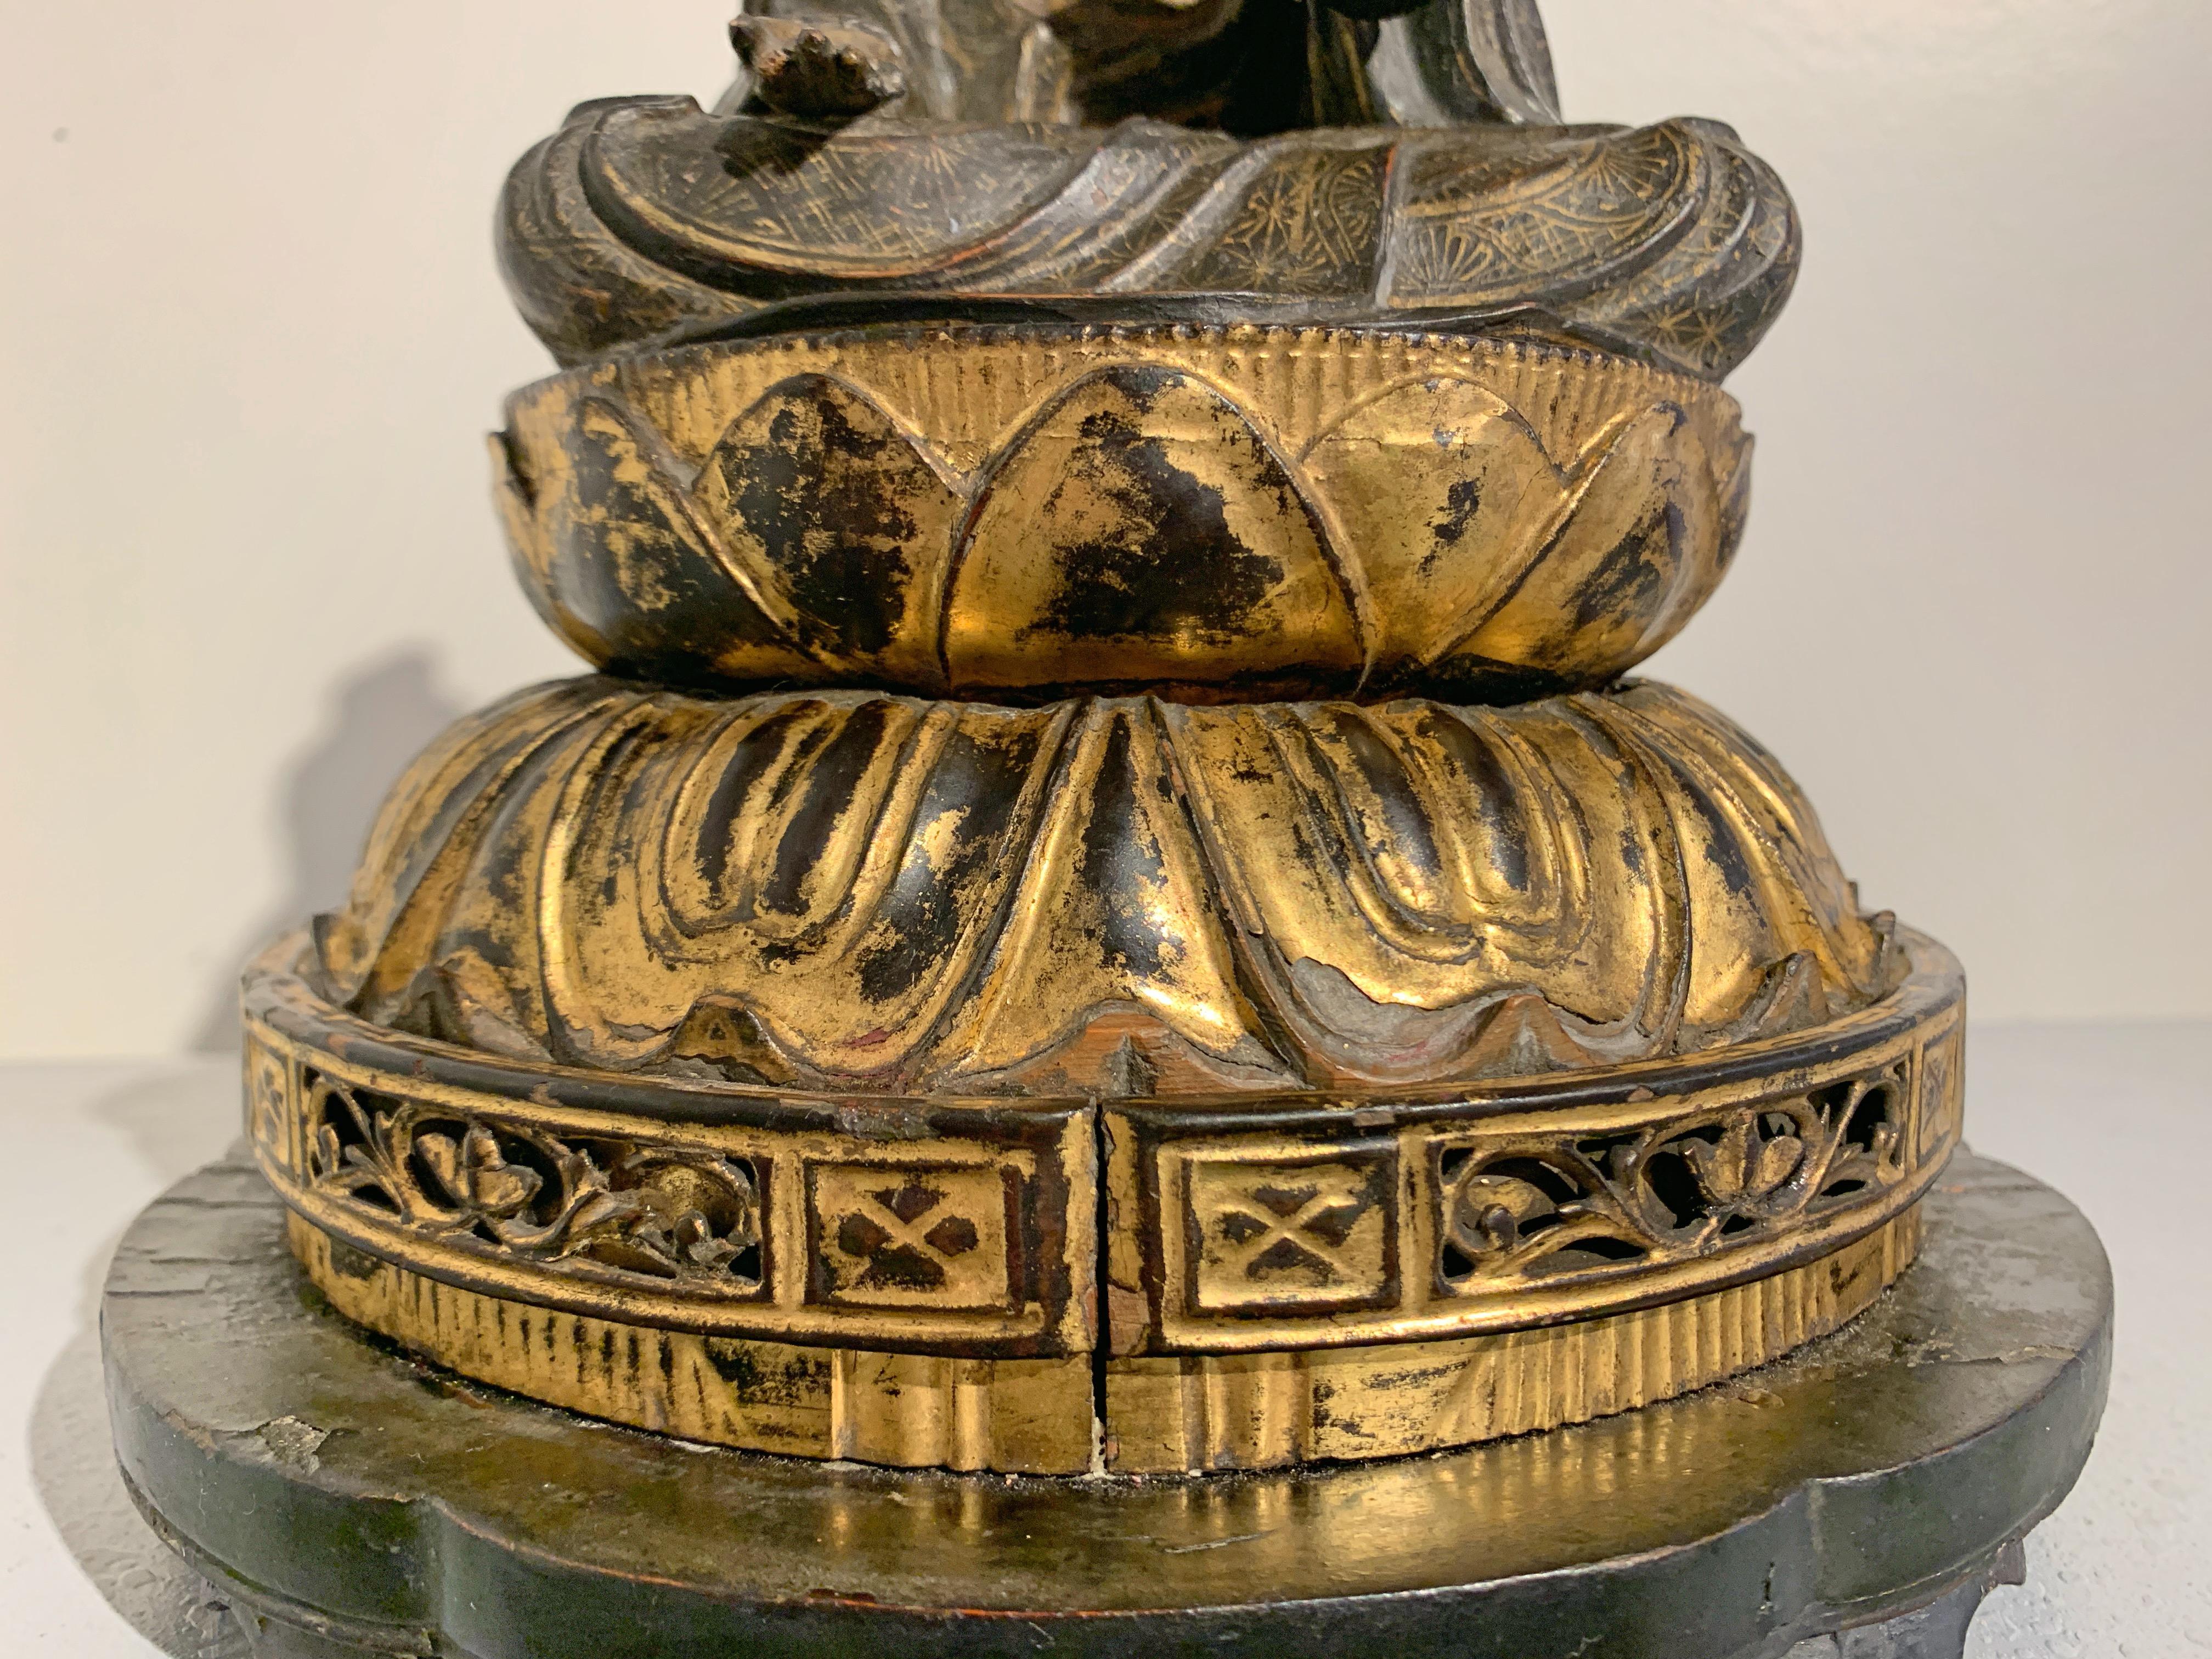 Cypress Japanese Lacquer and Giltwood Kannon, Edo Period, Japan